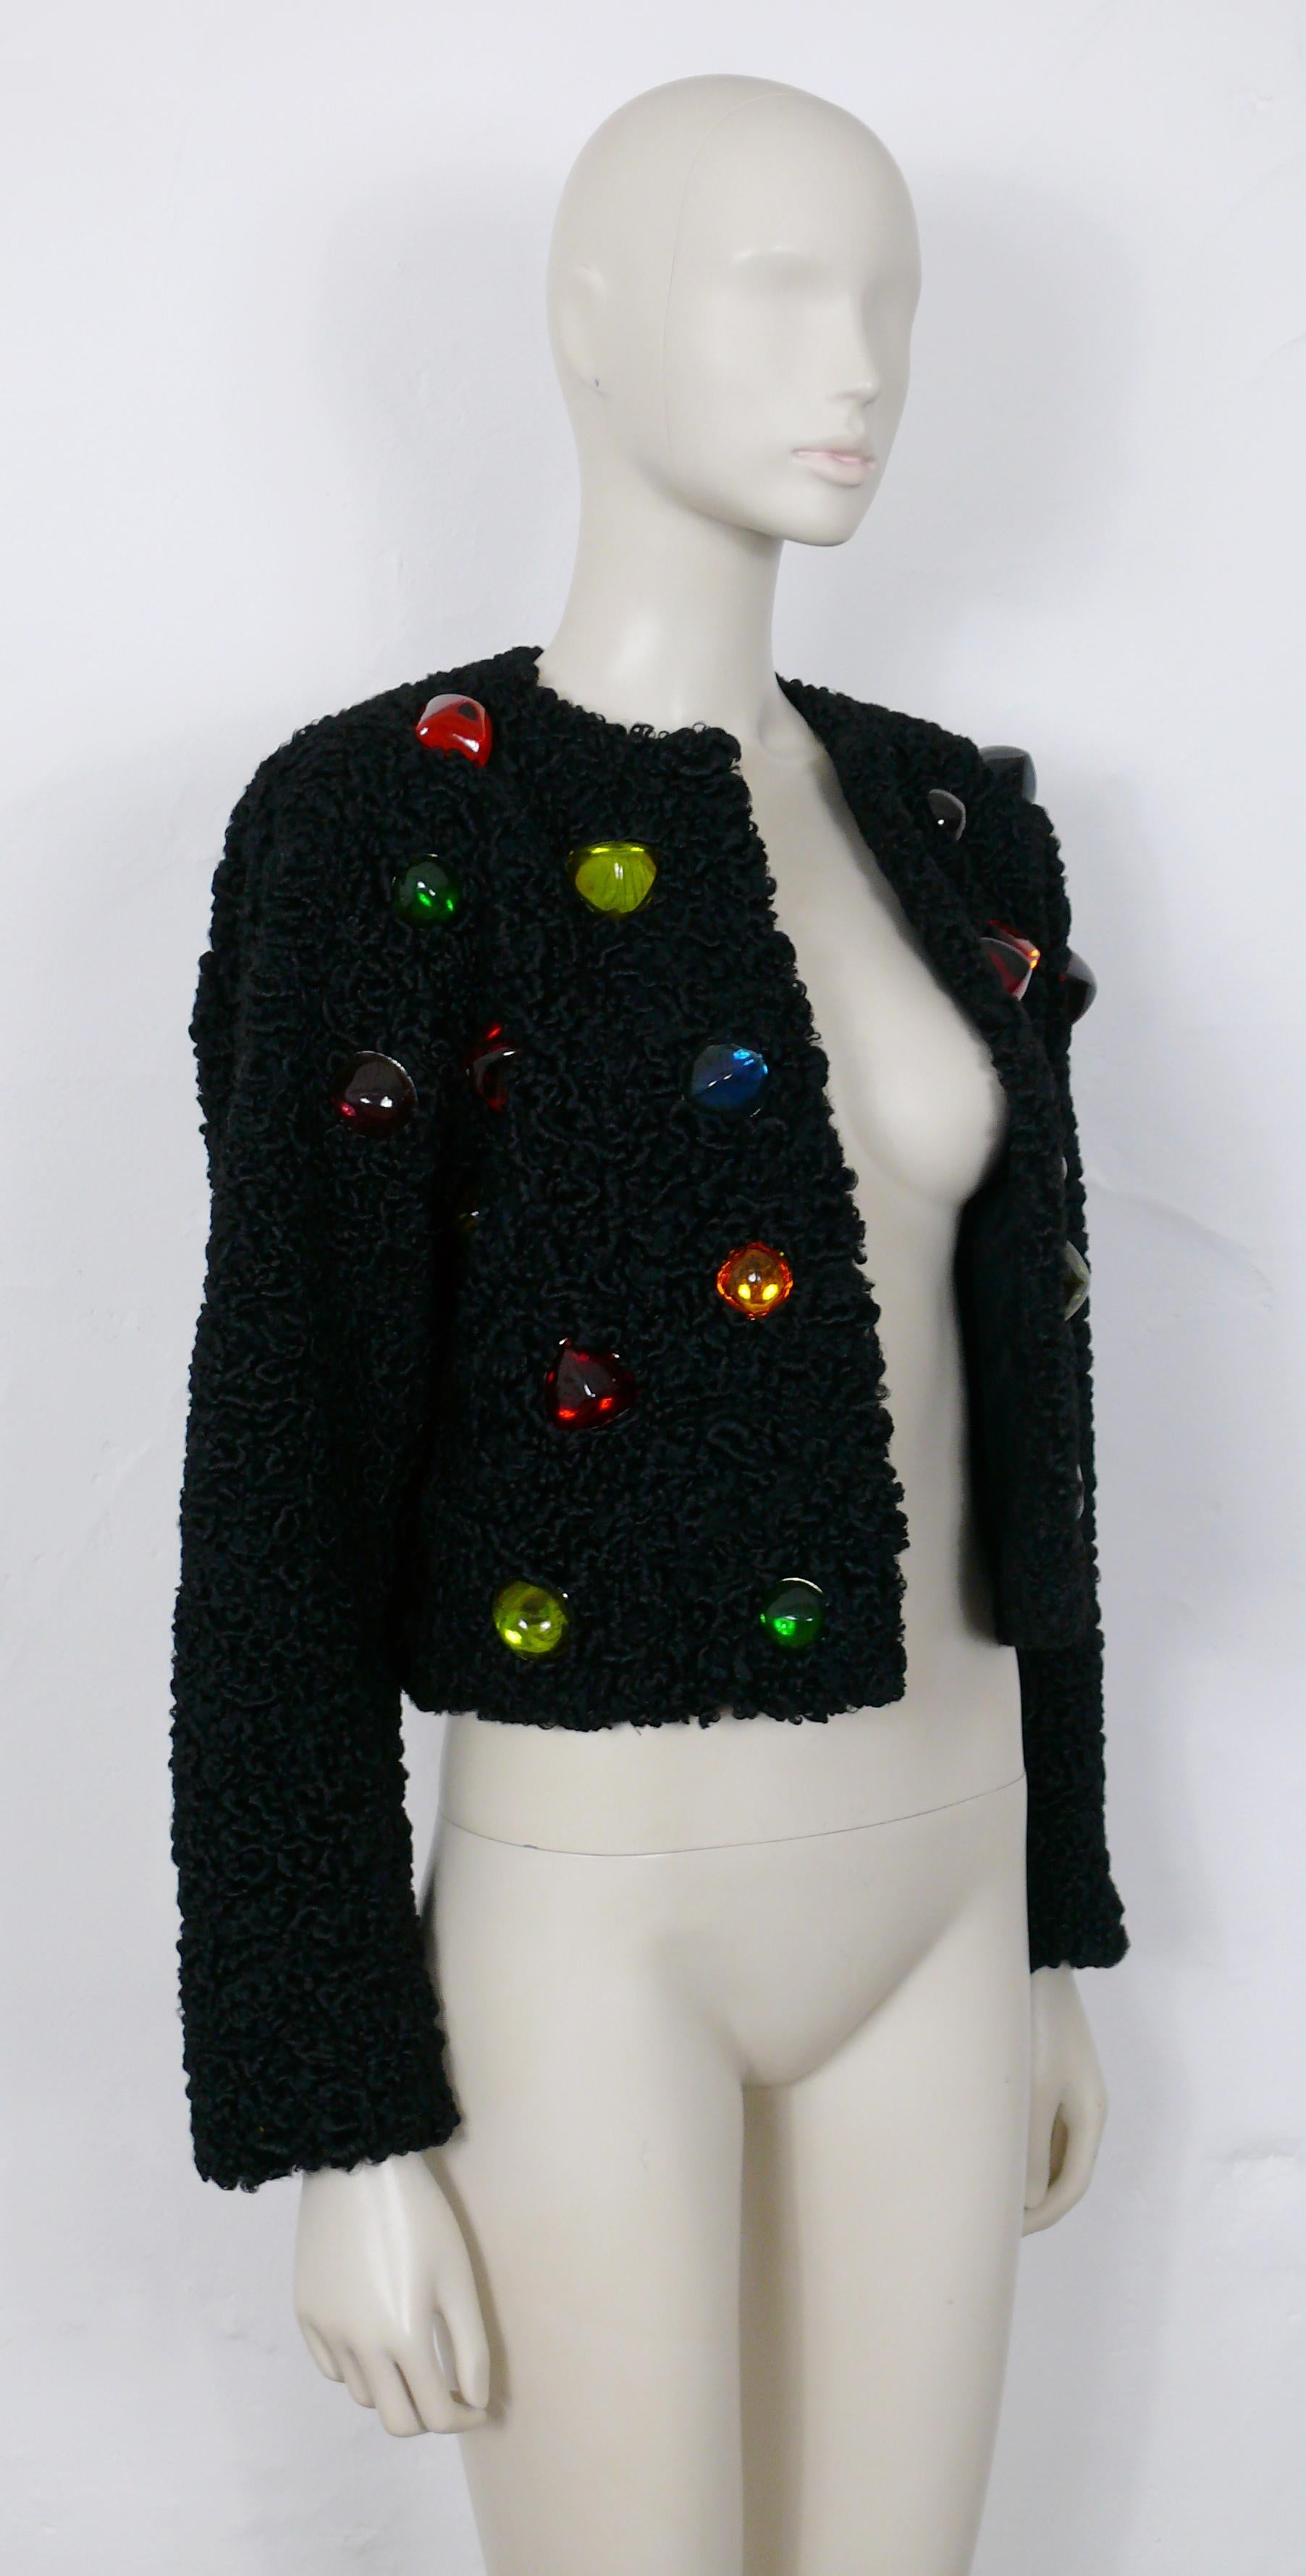 YVES SAINT LAURENT Fourrures vintage rare black astrakhan fur bolero jacket embellished with massive multicolored three-dimensional resin cabochons.

Probably circa 1990.
The pink leather jacket featuring similar resin cabochons on the picture #5 is